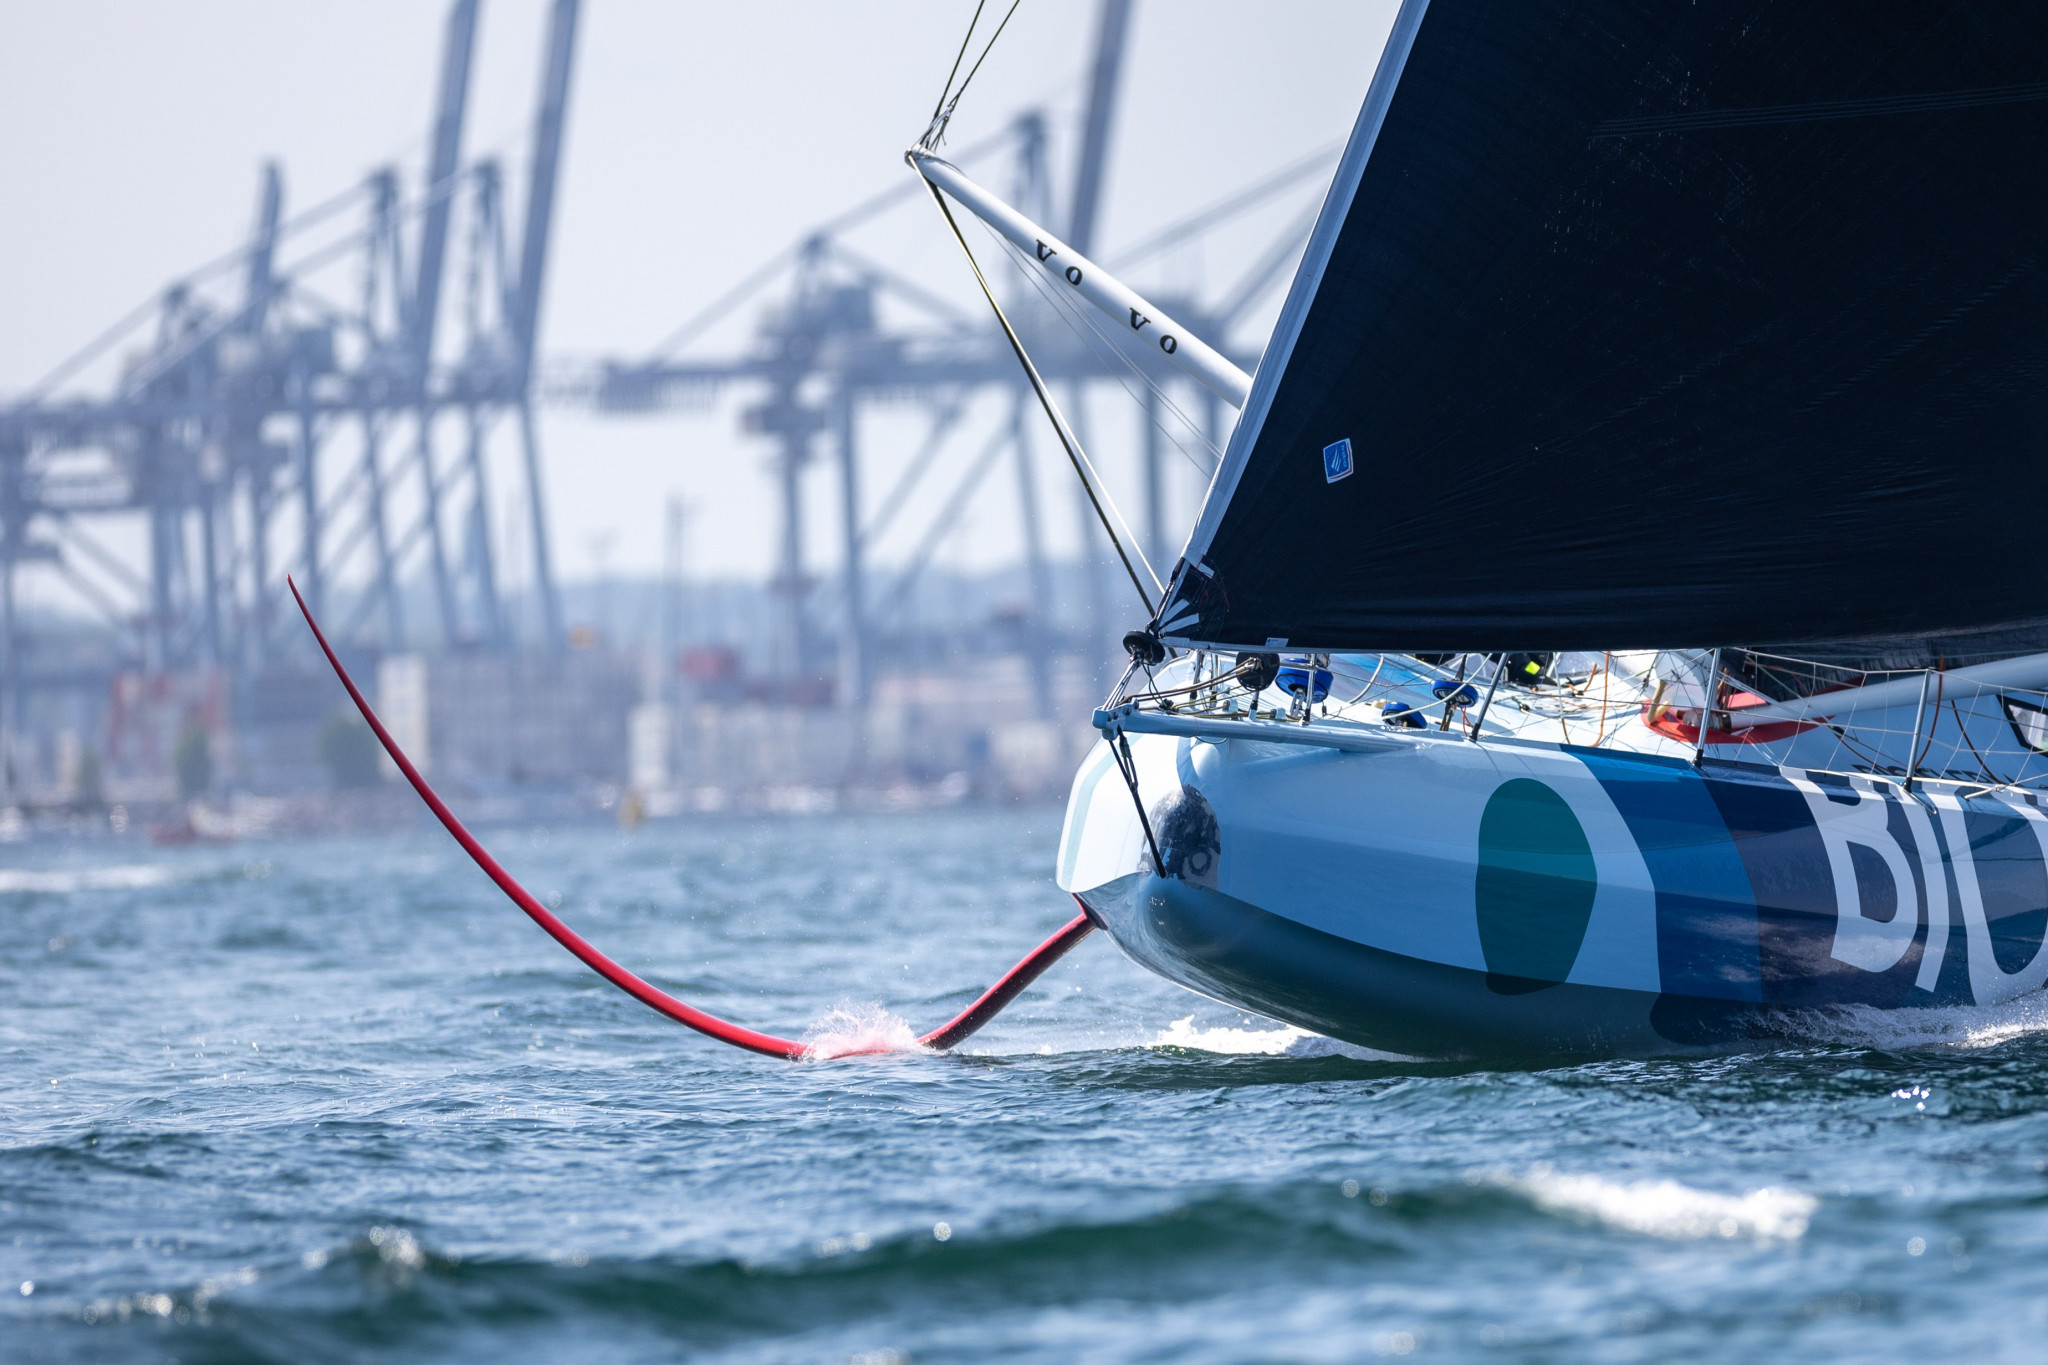 Biotherm stormed to victory in the IMOCA in-port race ©Peter Broegger